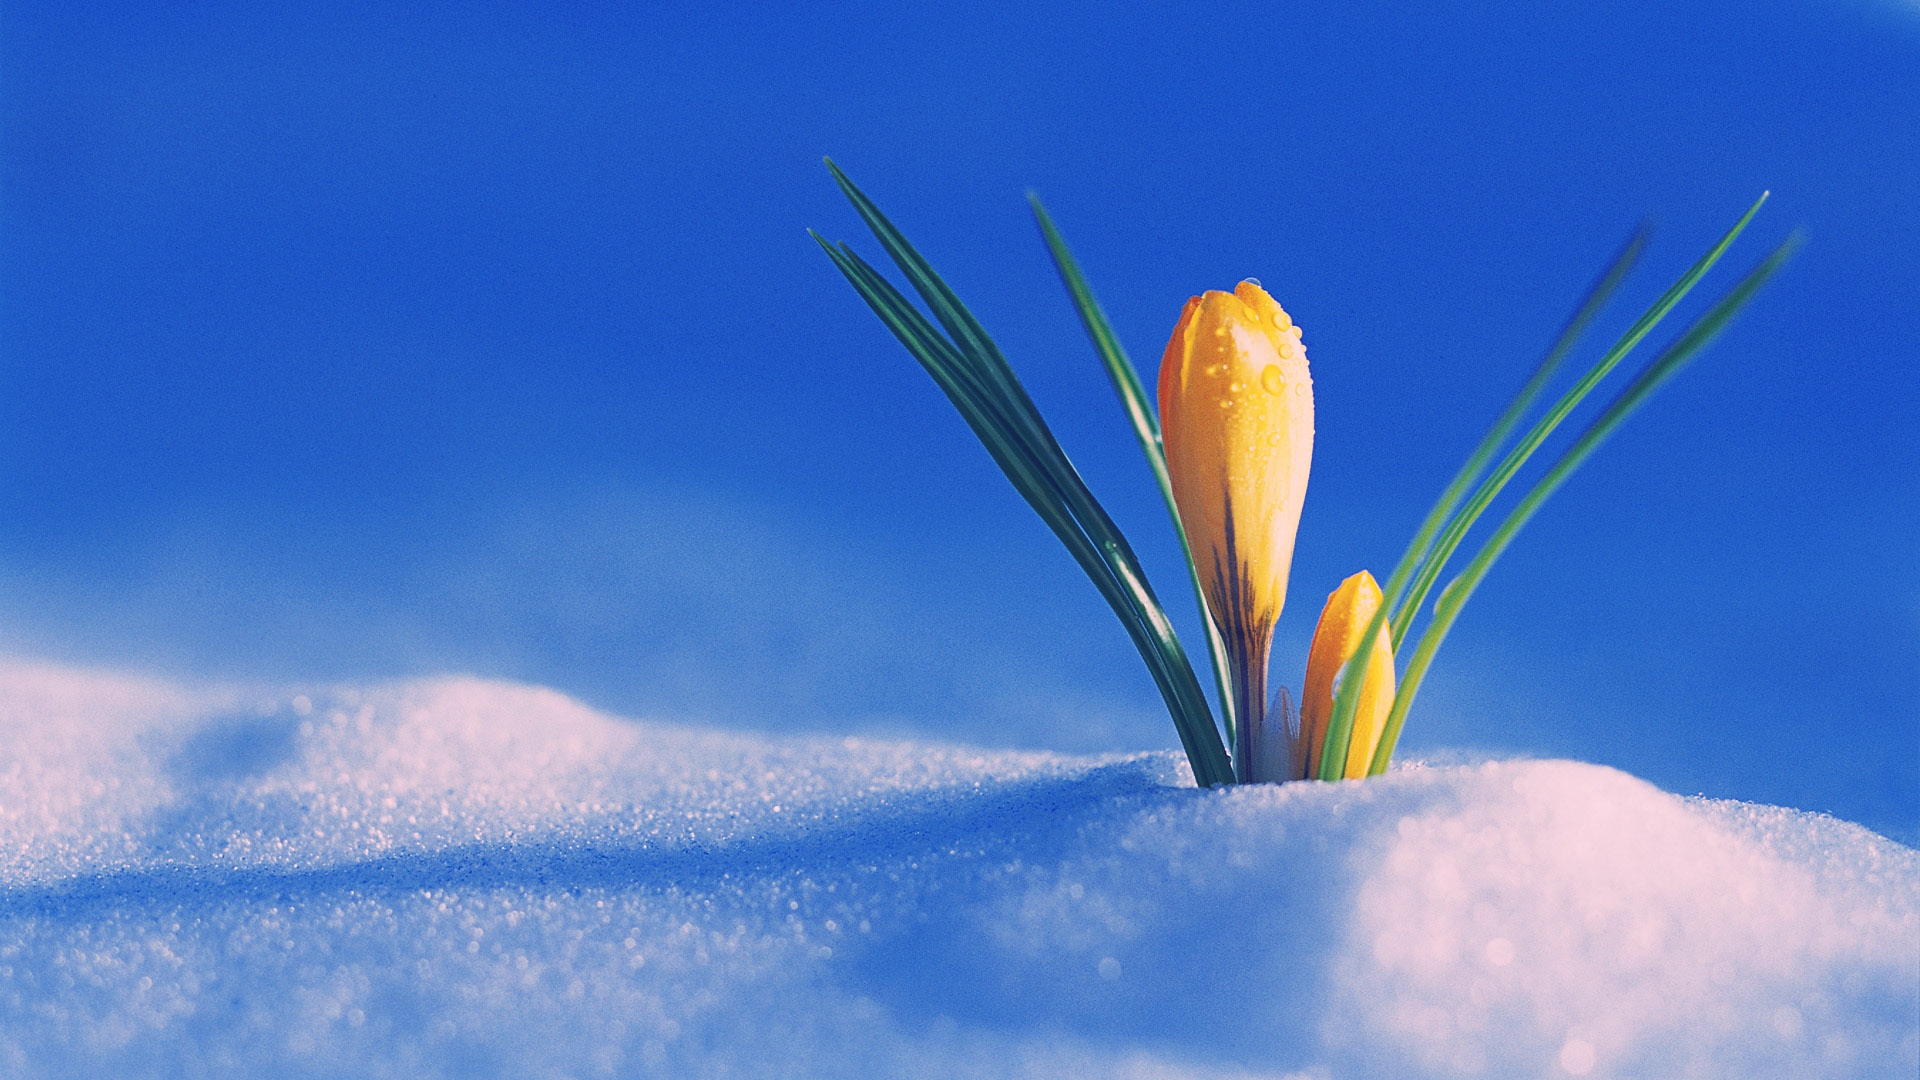 the-first-day-of-spring-wallpaper-for-1920x1080-hdtv-1080p-607-15